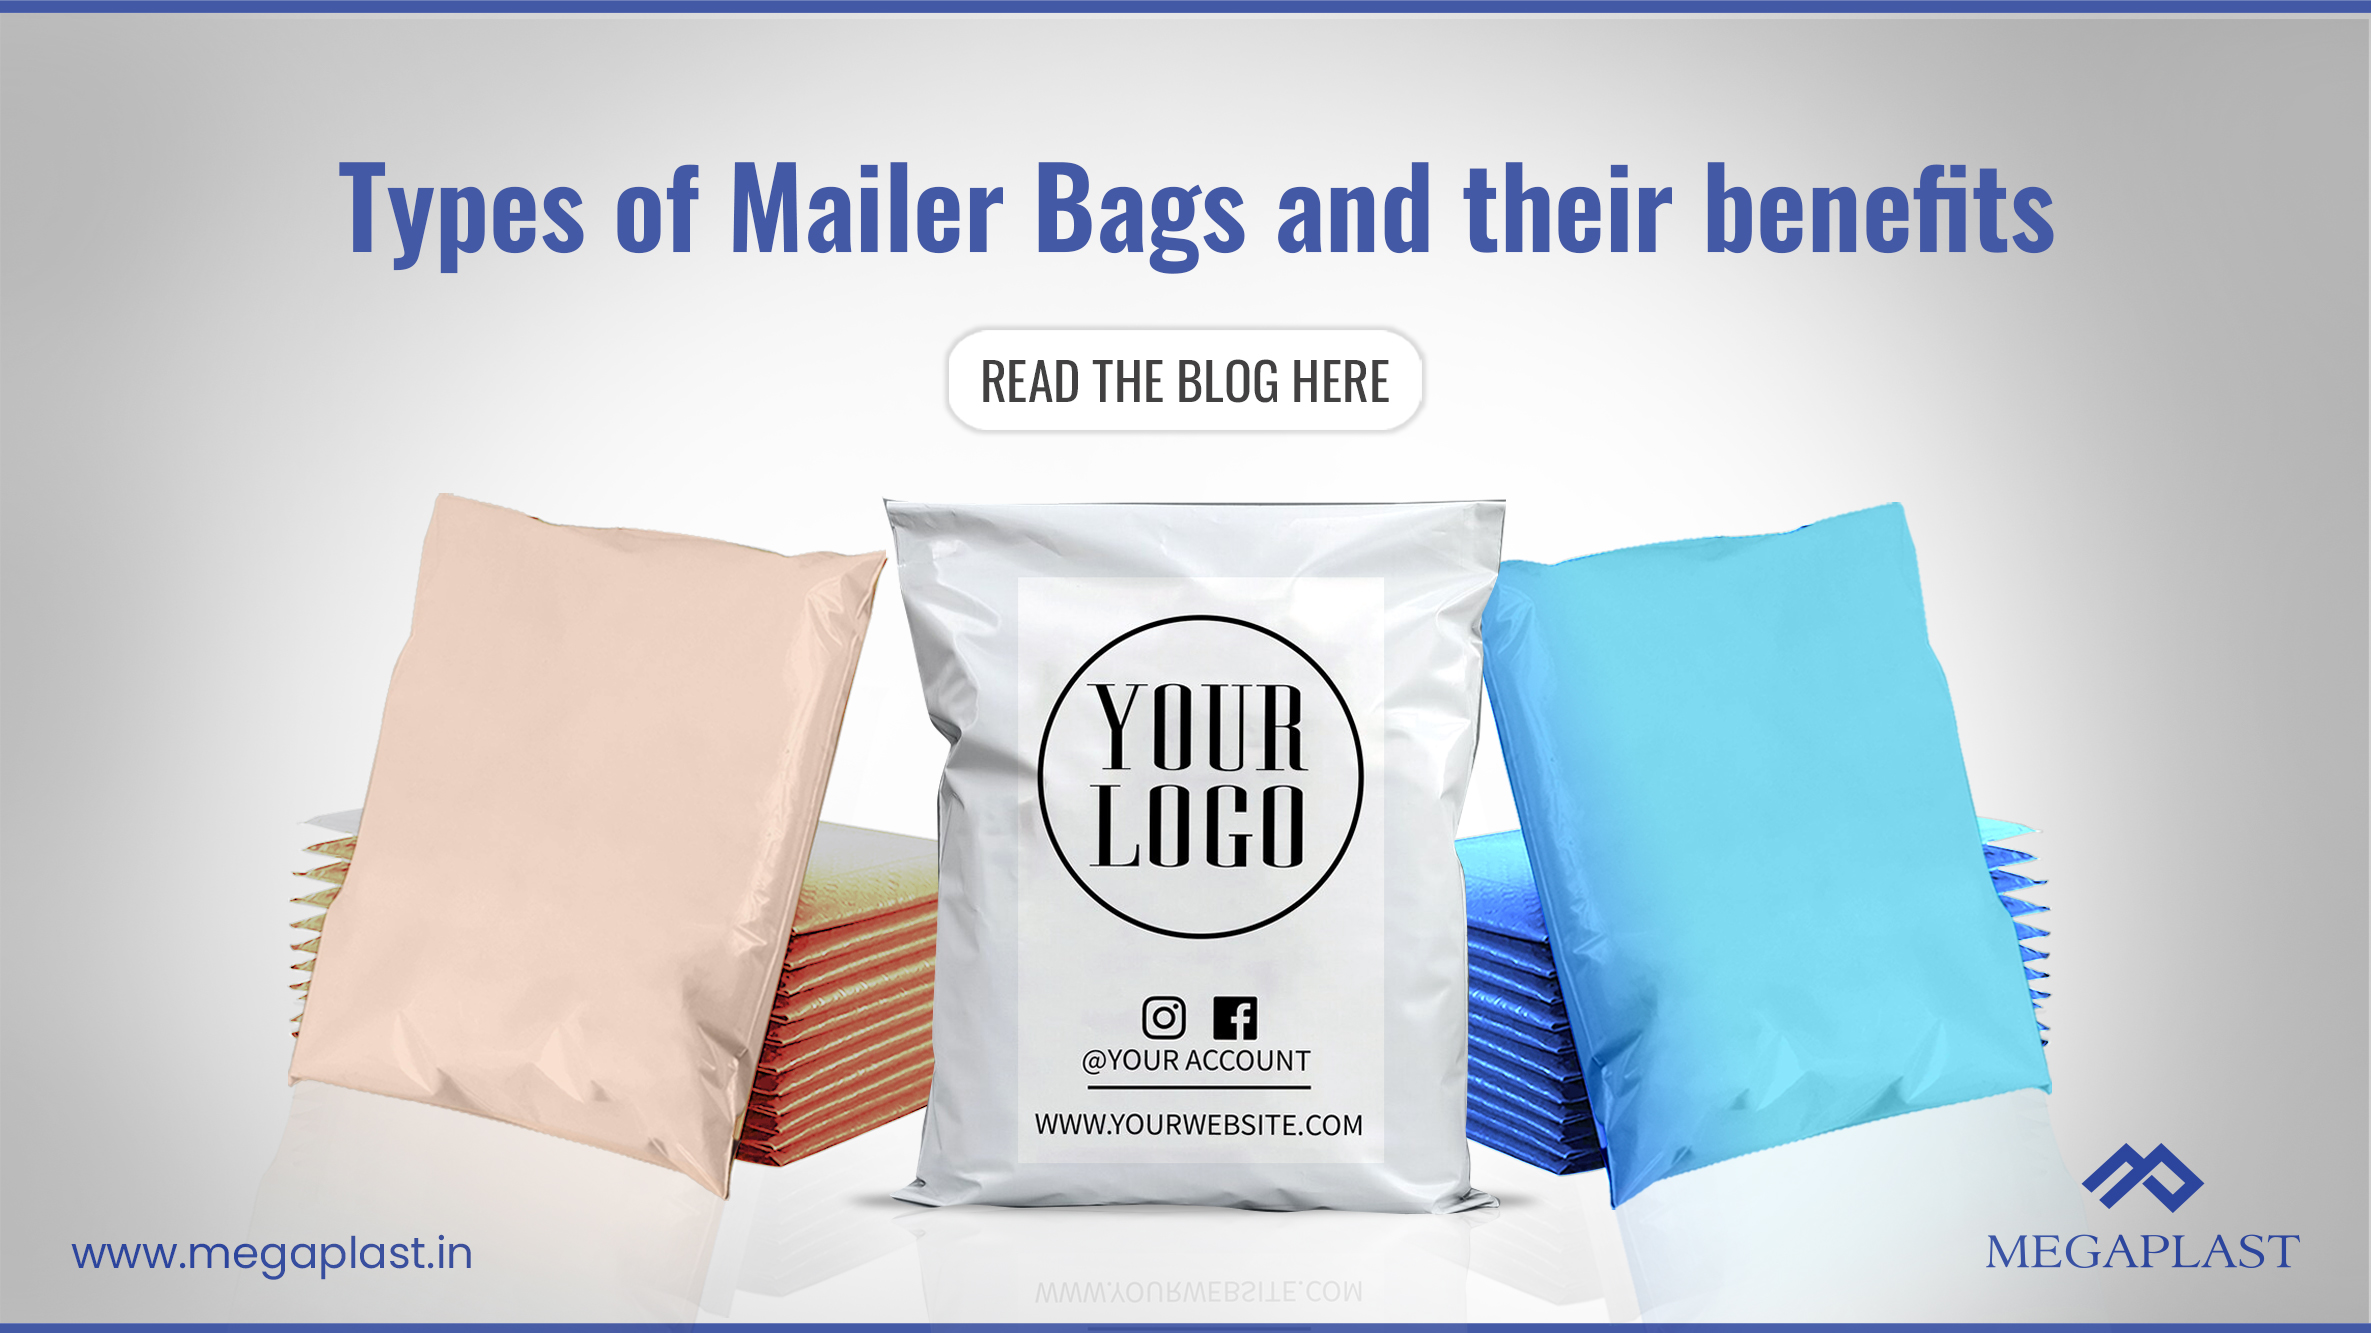 Types of Mailer Bags and their benefits